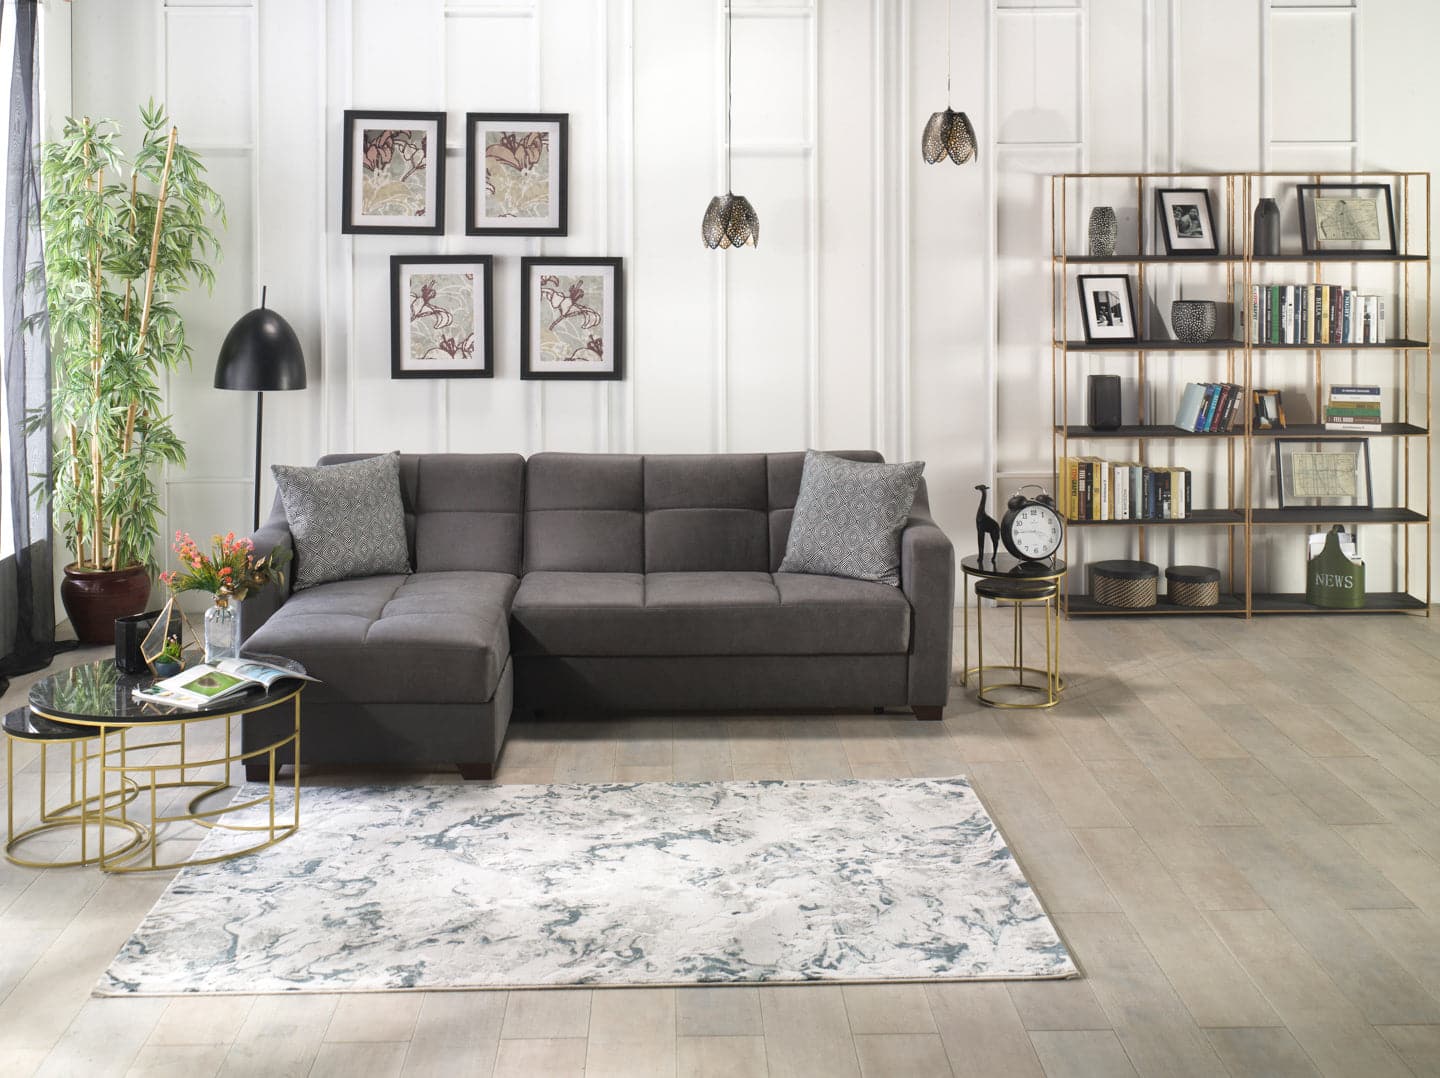 Tahoe Sleeper Sectional by Bellona DARK GRAY Sectional + Ottoman